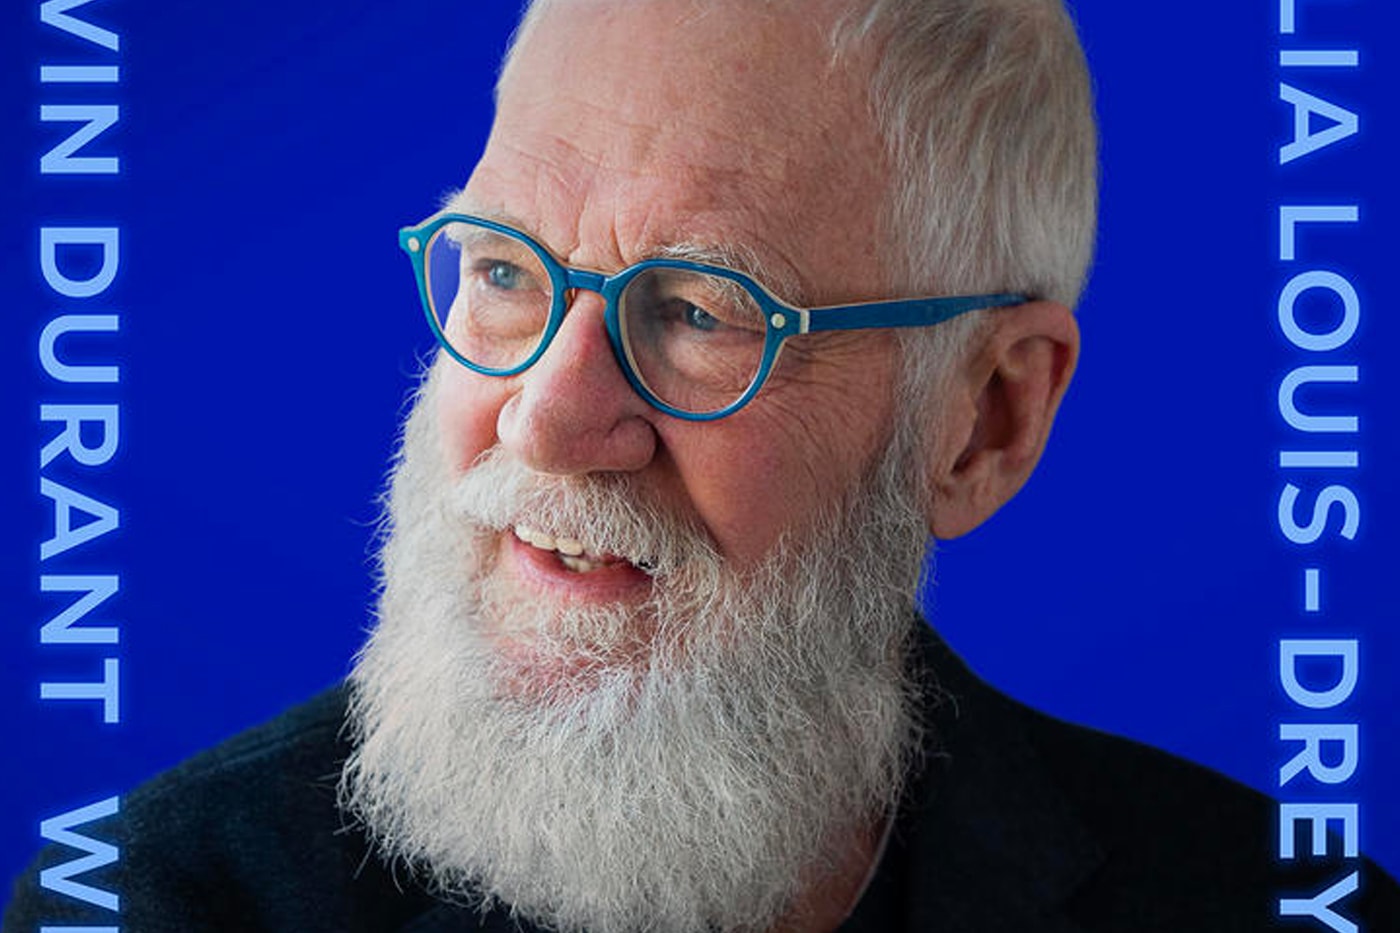 Netflix My Next Guest needs no introduction With David Letterman Season 4 Guests Release Date will smith cardi b billie eilish Kevin Durant Julia Louis-Dreyfus, Ryan Reynolds